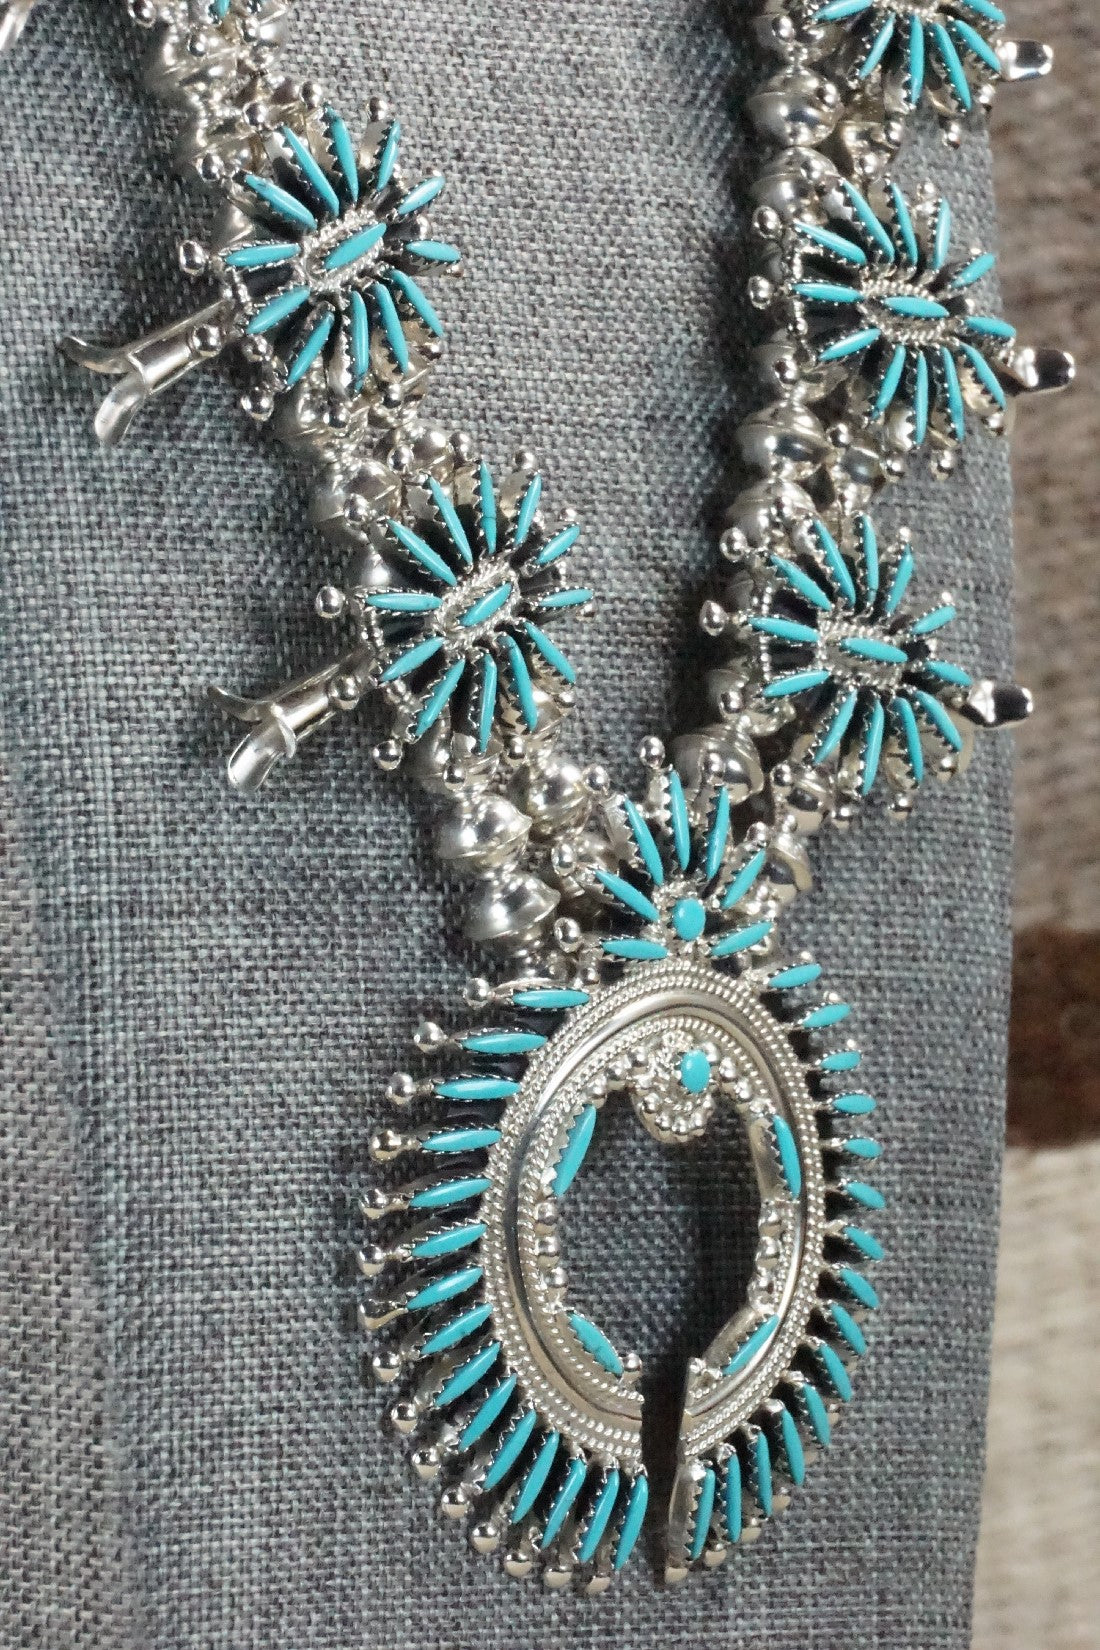 Carl Luthey Turquoise Squash Blossom Necklace | Hoel's Sedona